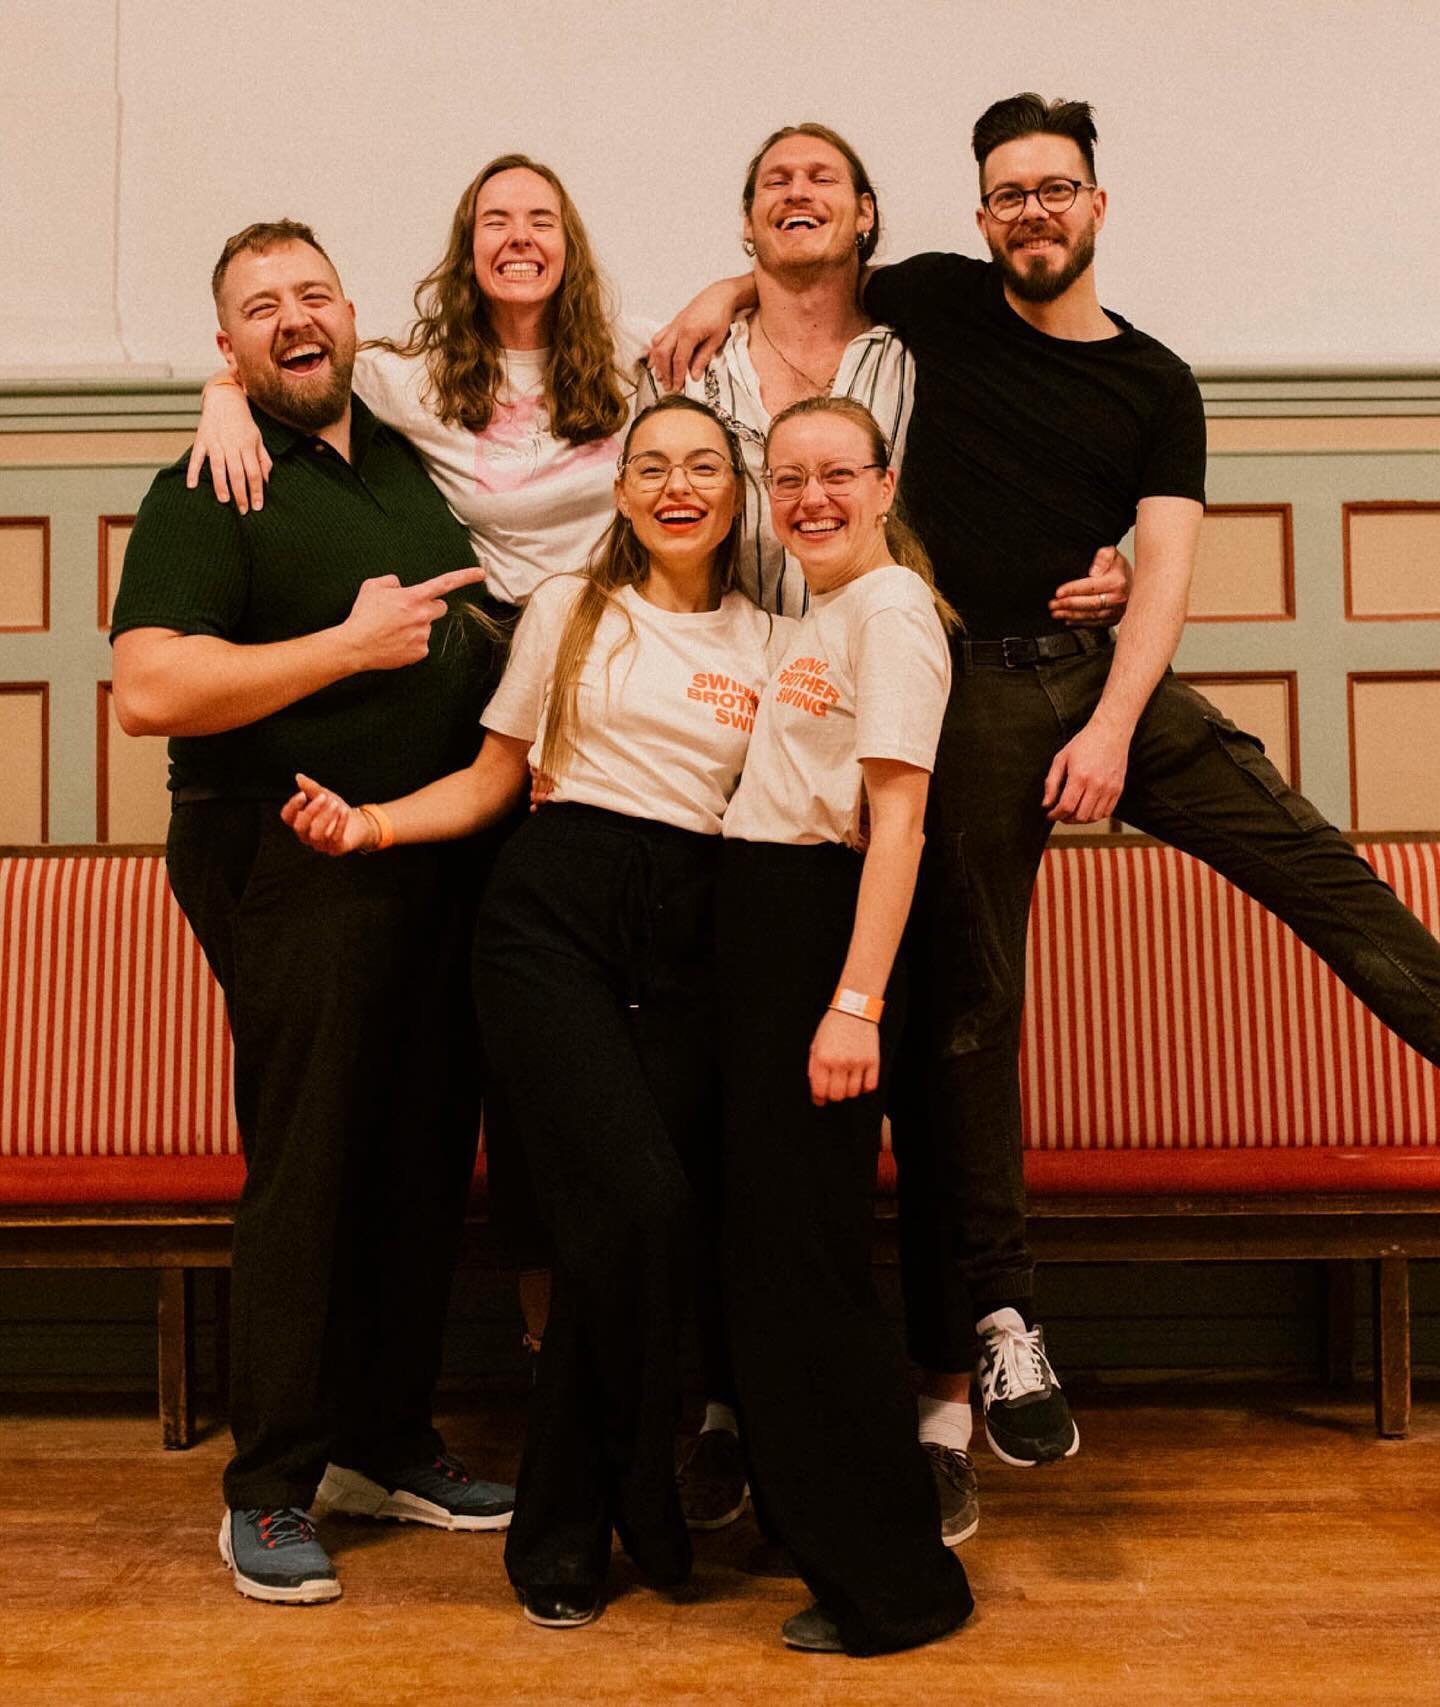 Hello! 👋🏻 We are the team putting together Swing Brother, Swing and we thought we should introduce ourselves! We are Anders, Hyulia, Ingrid, Ruben, Benjamin, Hannah, (and if you swipe you&rsquo;ll meet our newest member Gunnhild!) 💖 We are a group